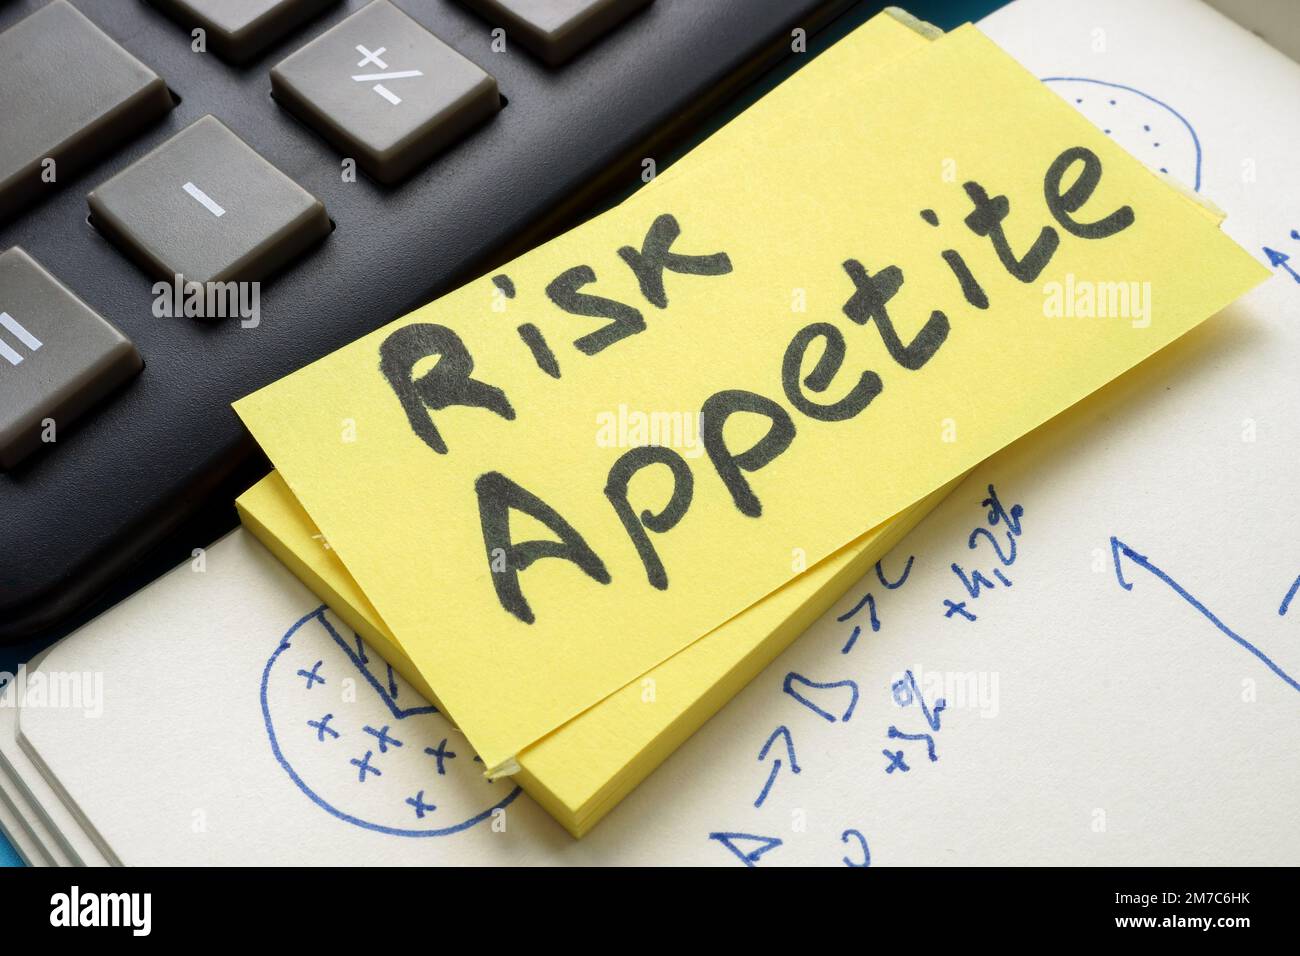 Risk appetite note on a yellow sticker. Stock Photo